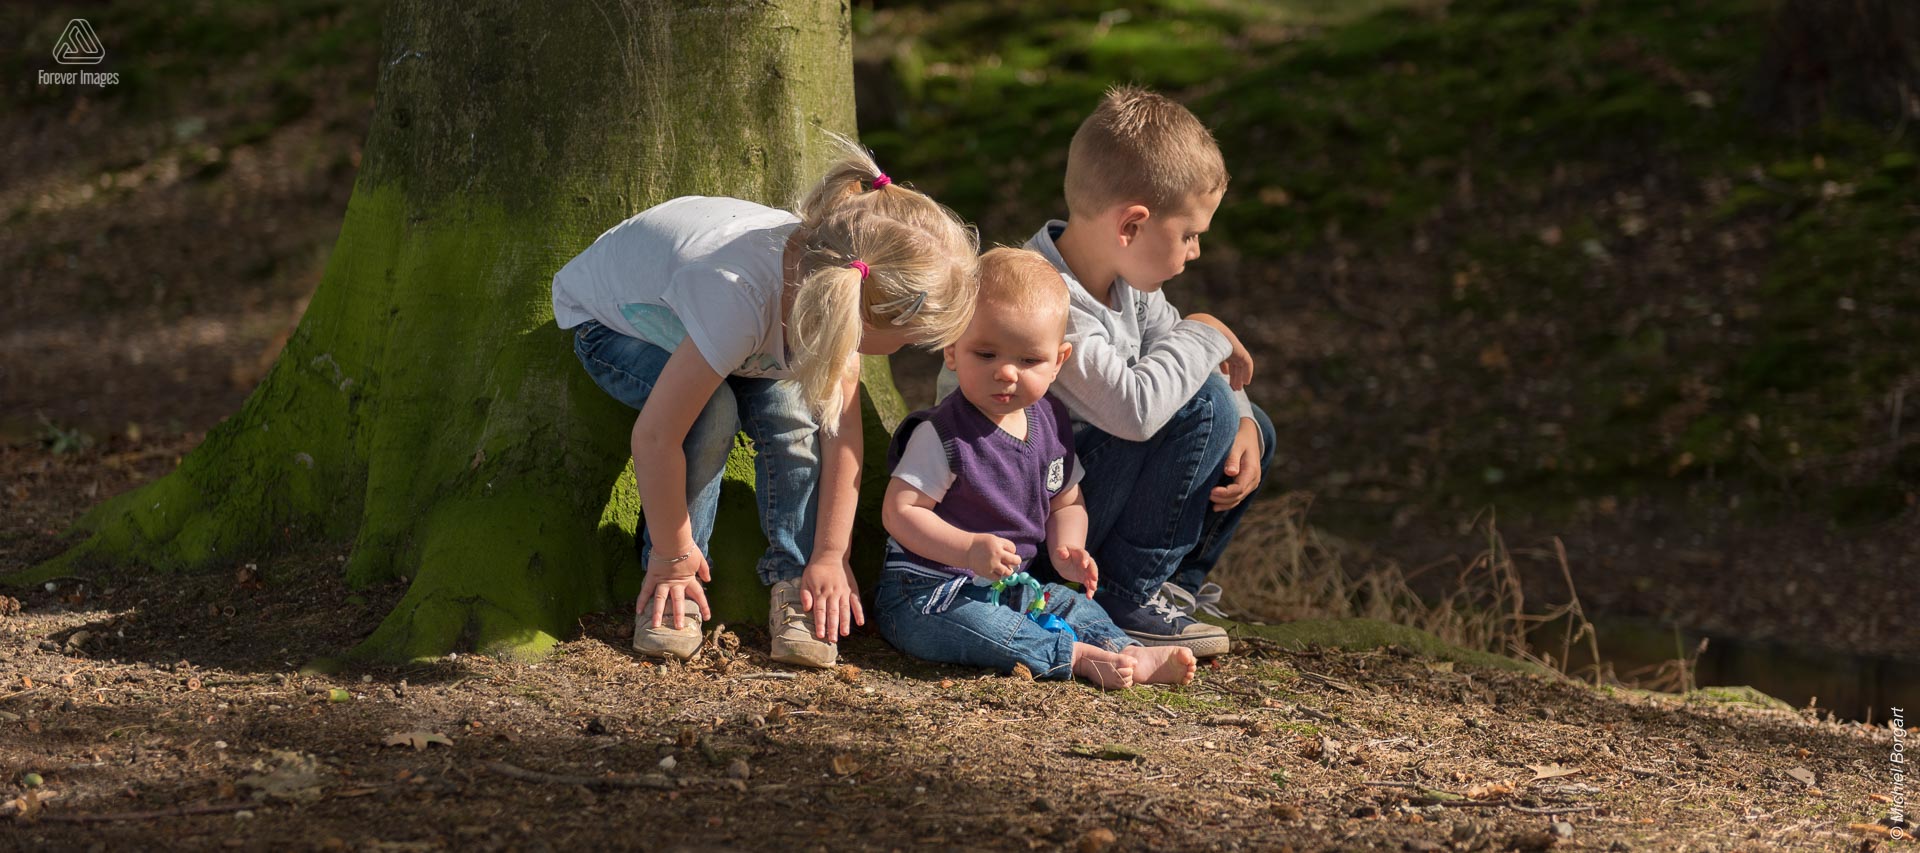 Portrait photo of brothers with sister in the woods in the sun | Portrait Photographer Michiel Borgart - Forever Images.